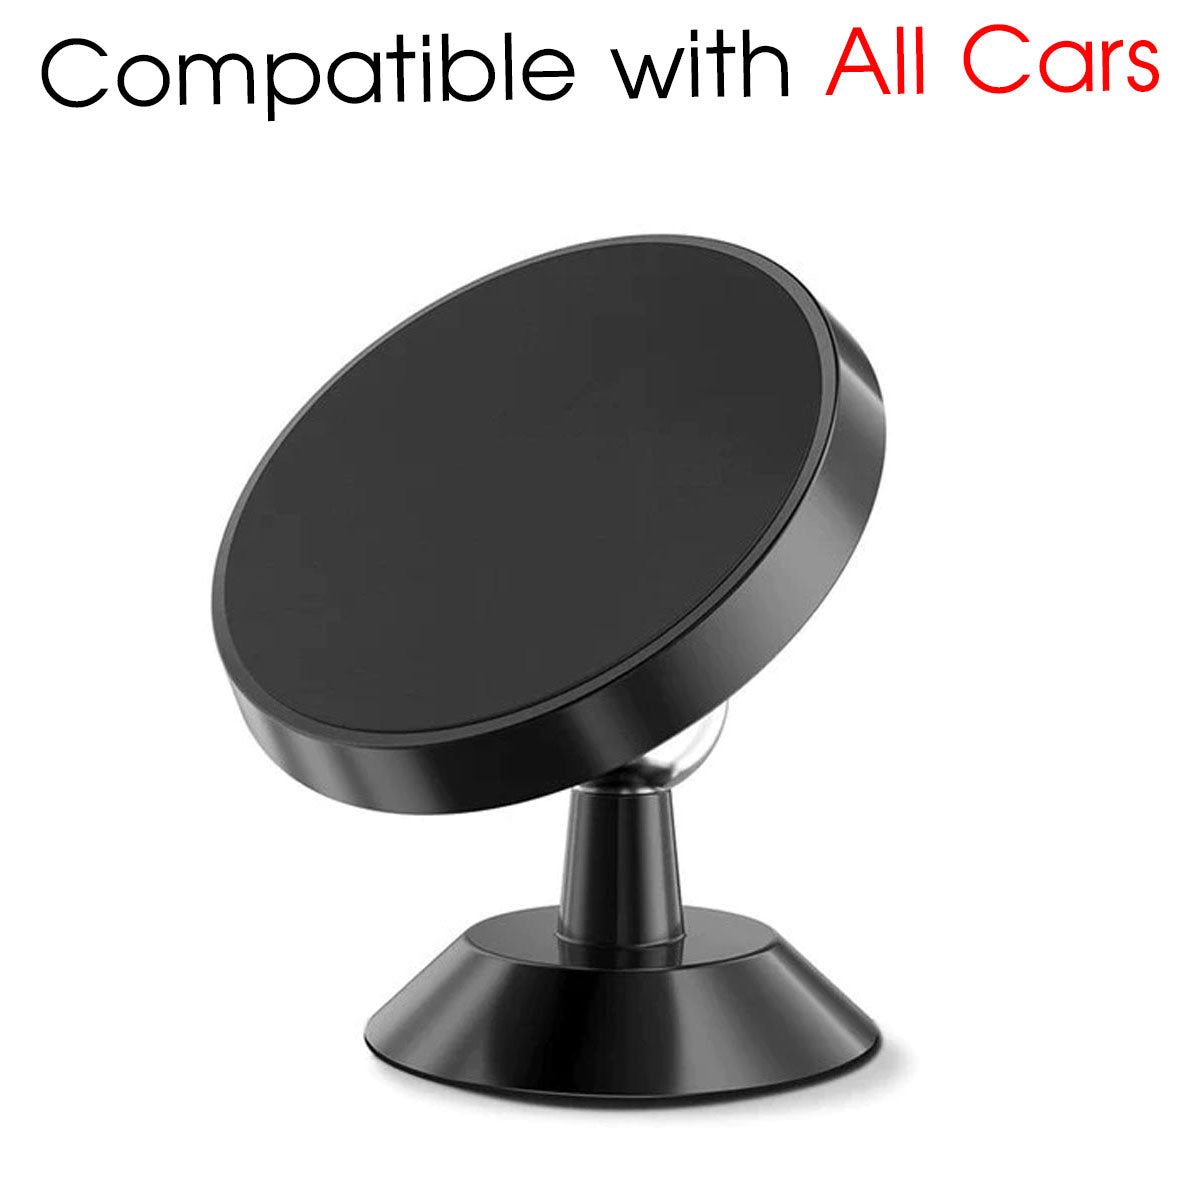 [2 Pack ] Magnetic Phone Mount, Custom For Your Cars, [ Super Strong Magnet ] [ with 4 Metal Plate ] car Magnetic Phone Holder, [ 360° Rotation ] Universal Dashboard car Mount Fits All Cell Phones, Car Accessories JE13982